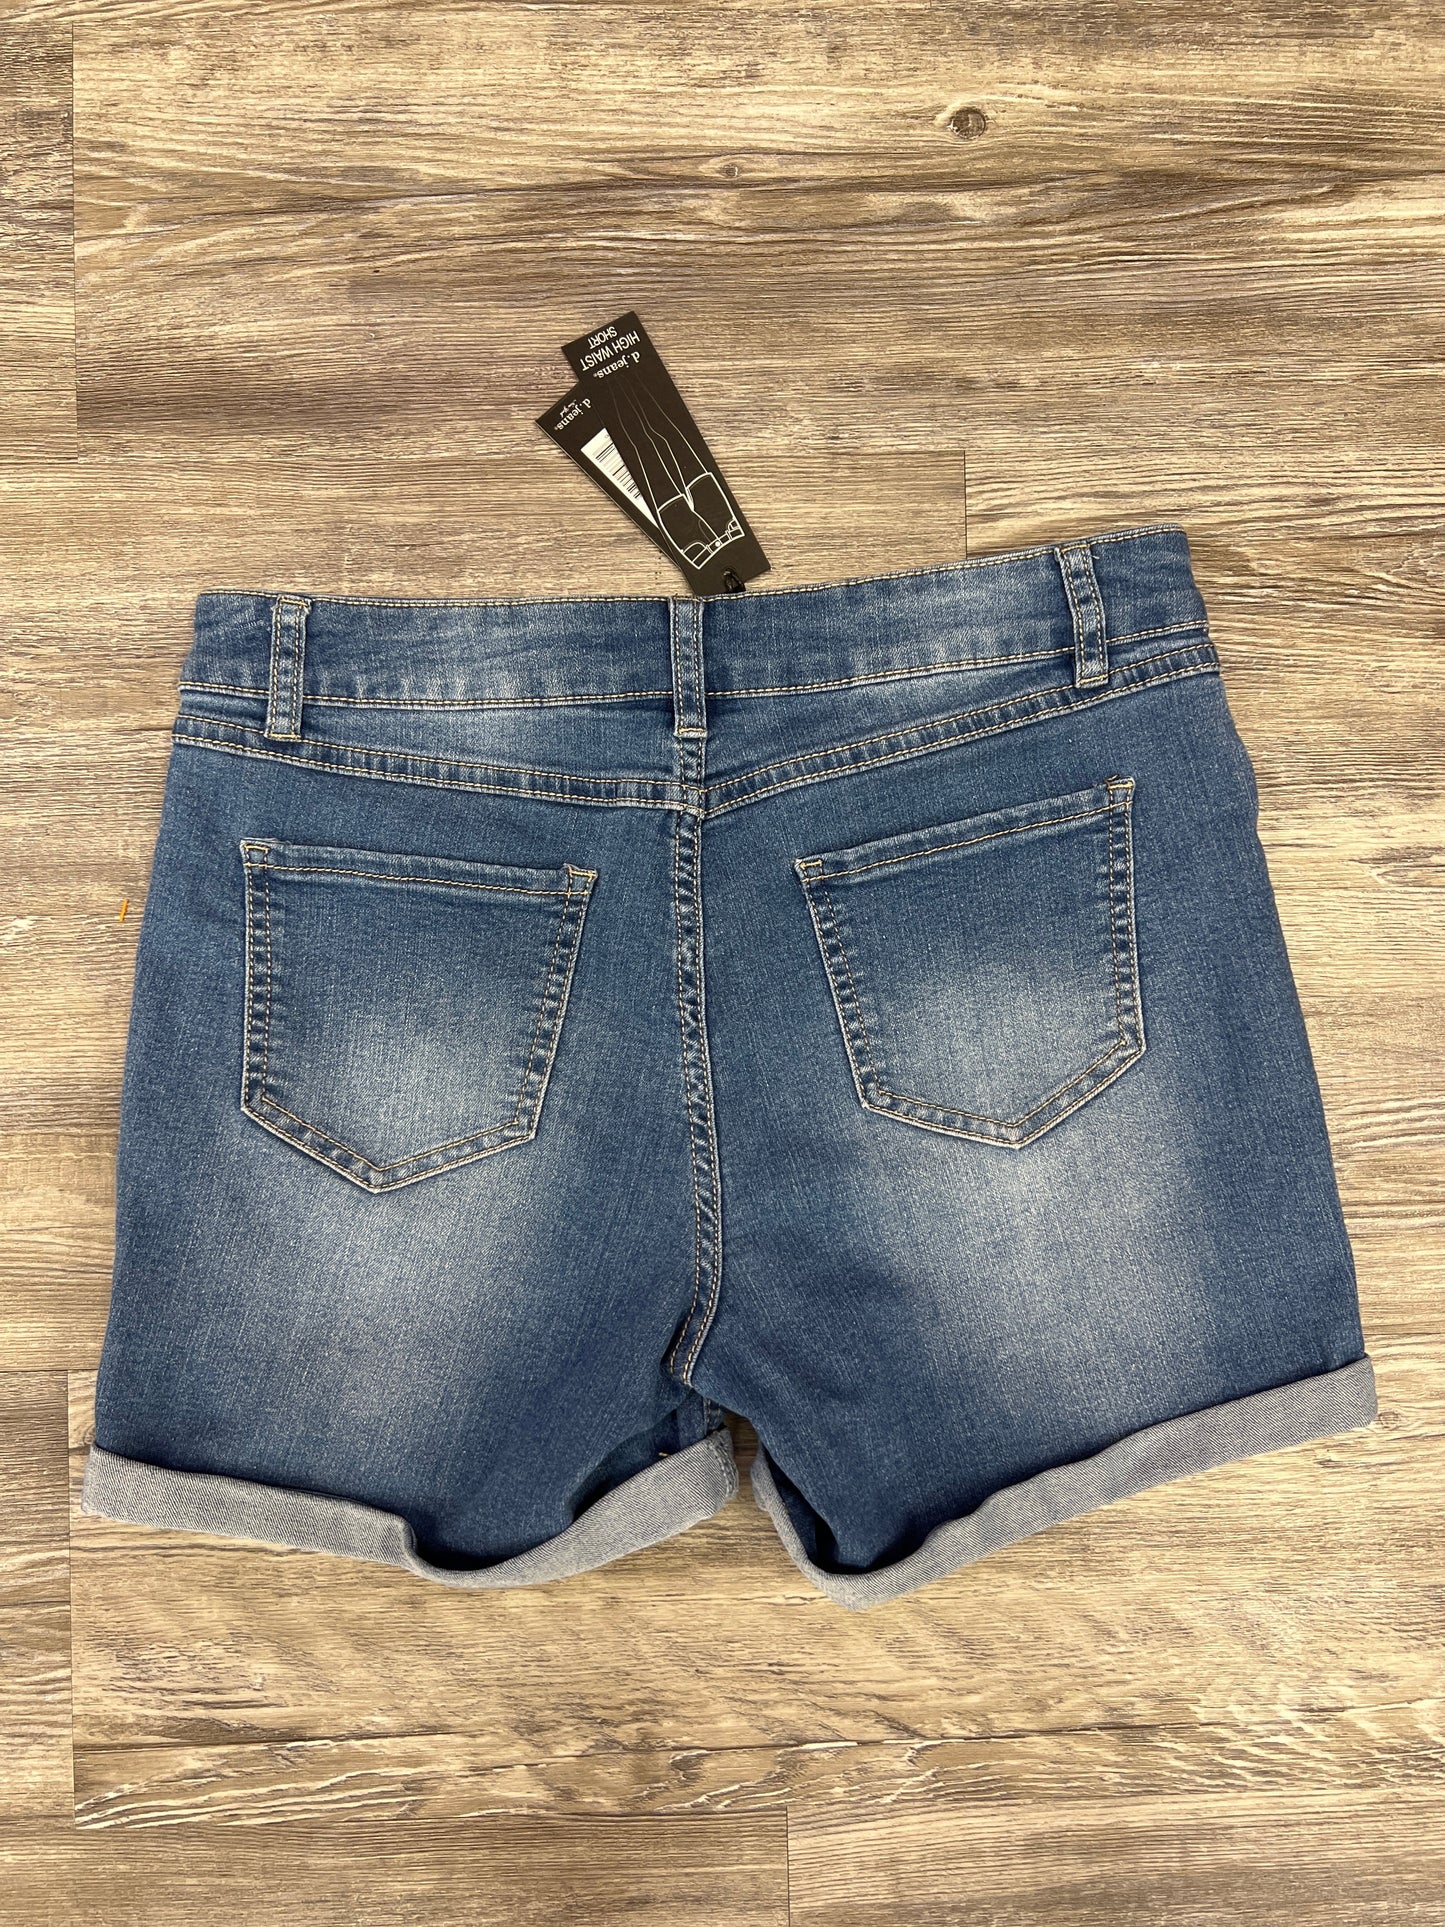 Shorts By D Jeans Size: 8